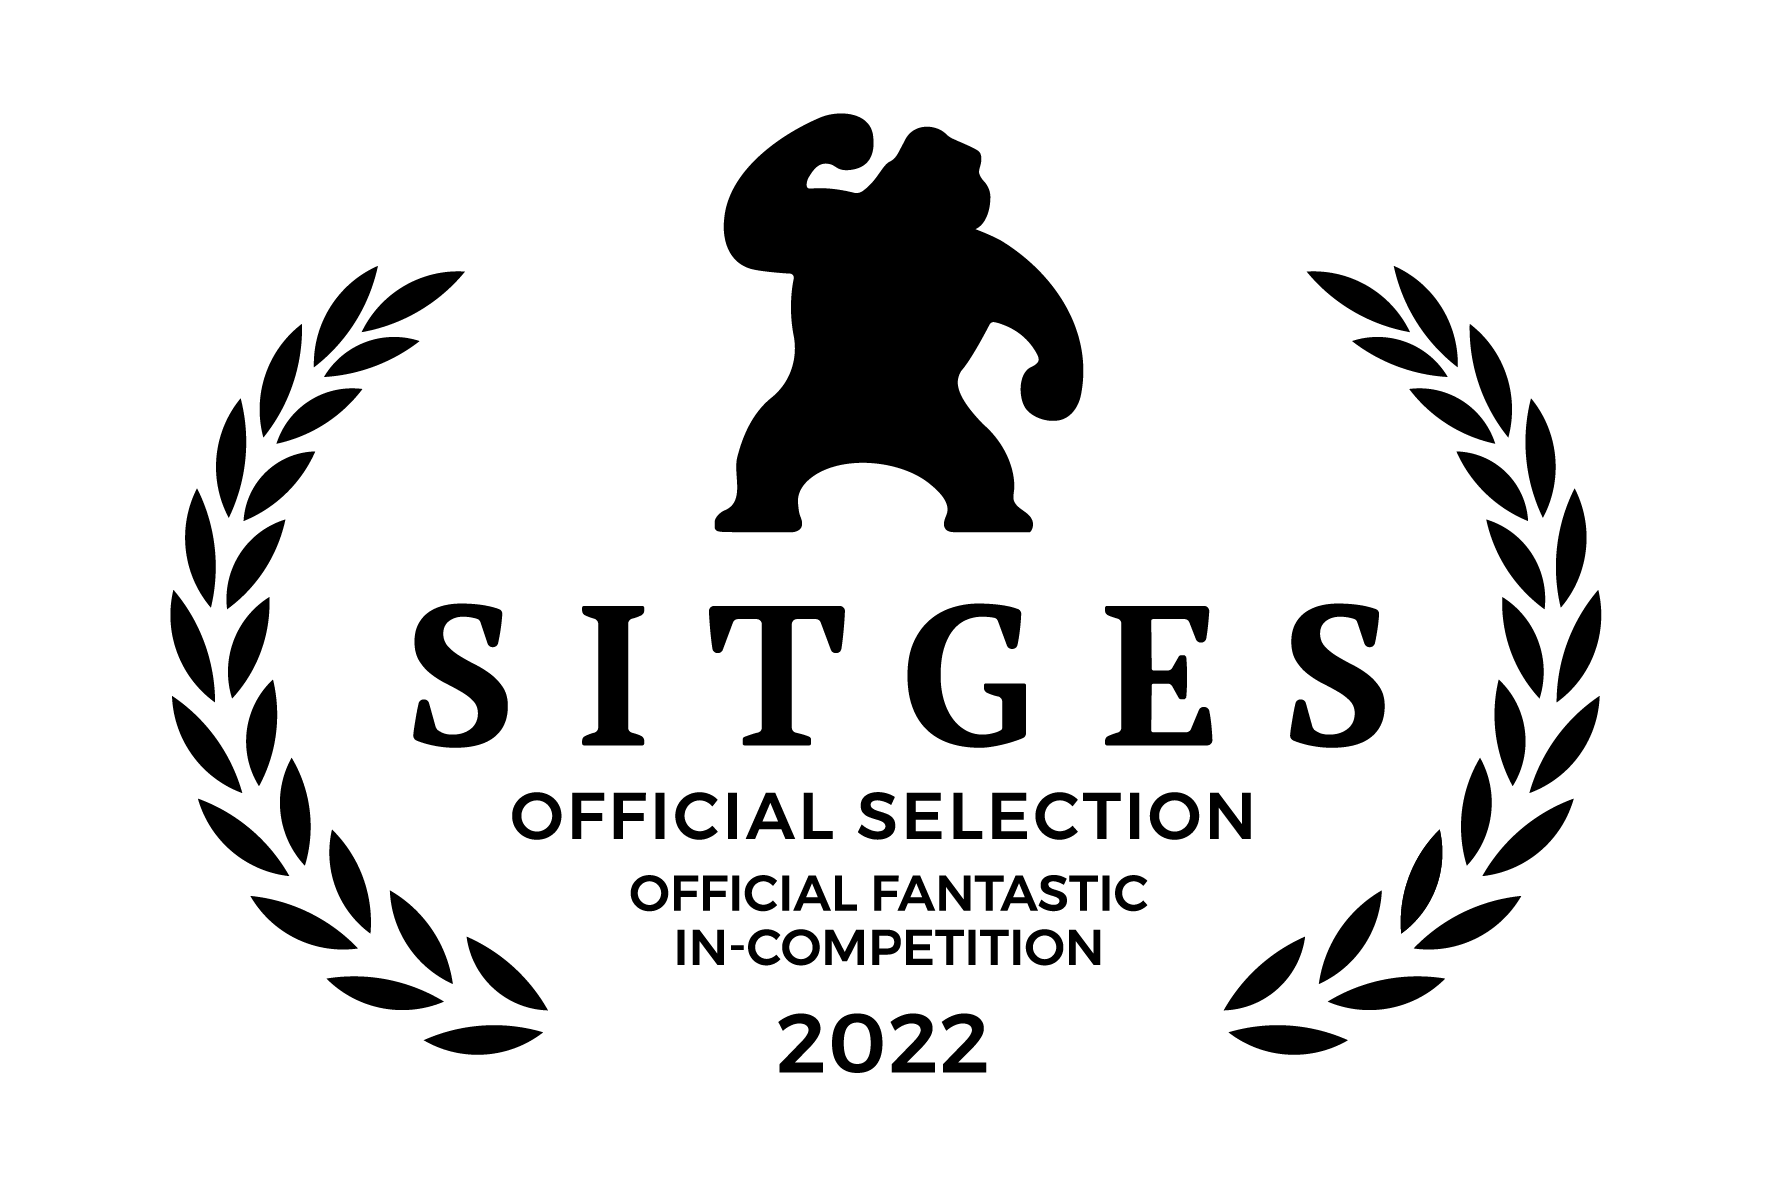 OFFICIAL_SELECTION_SITGES22-13.png